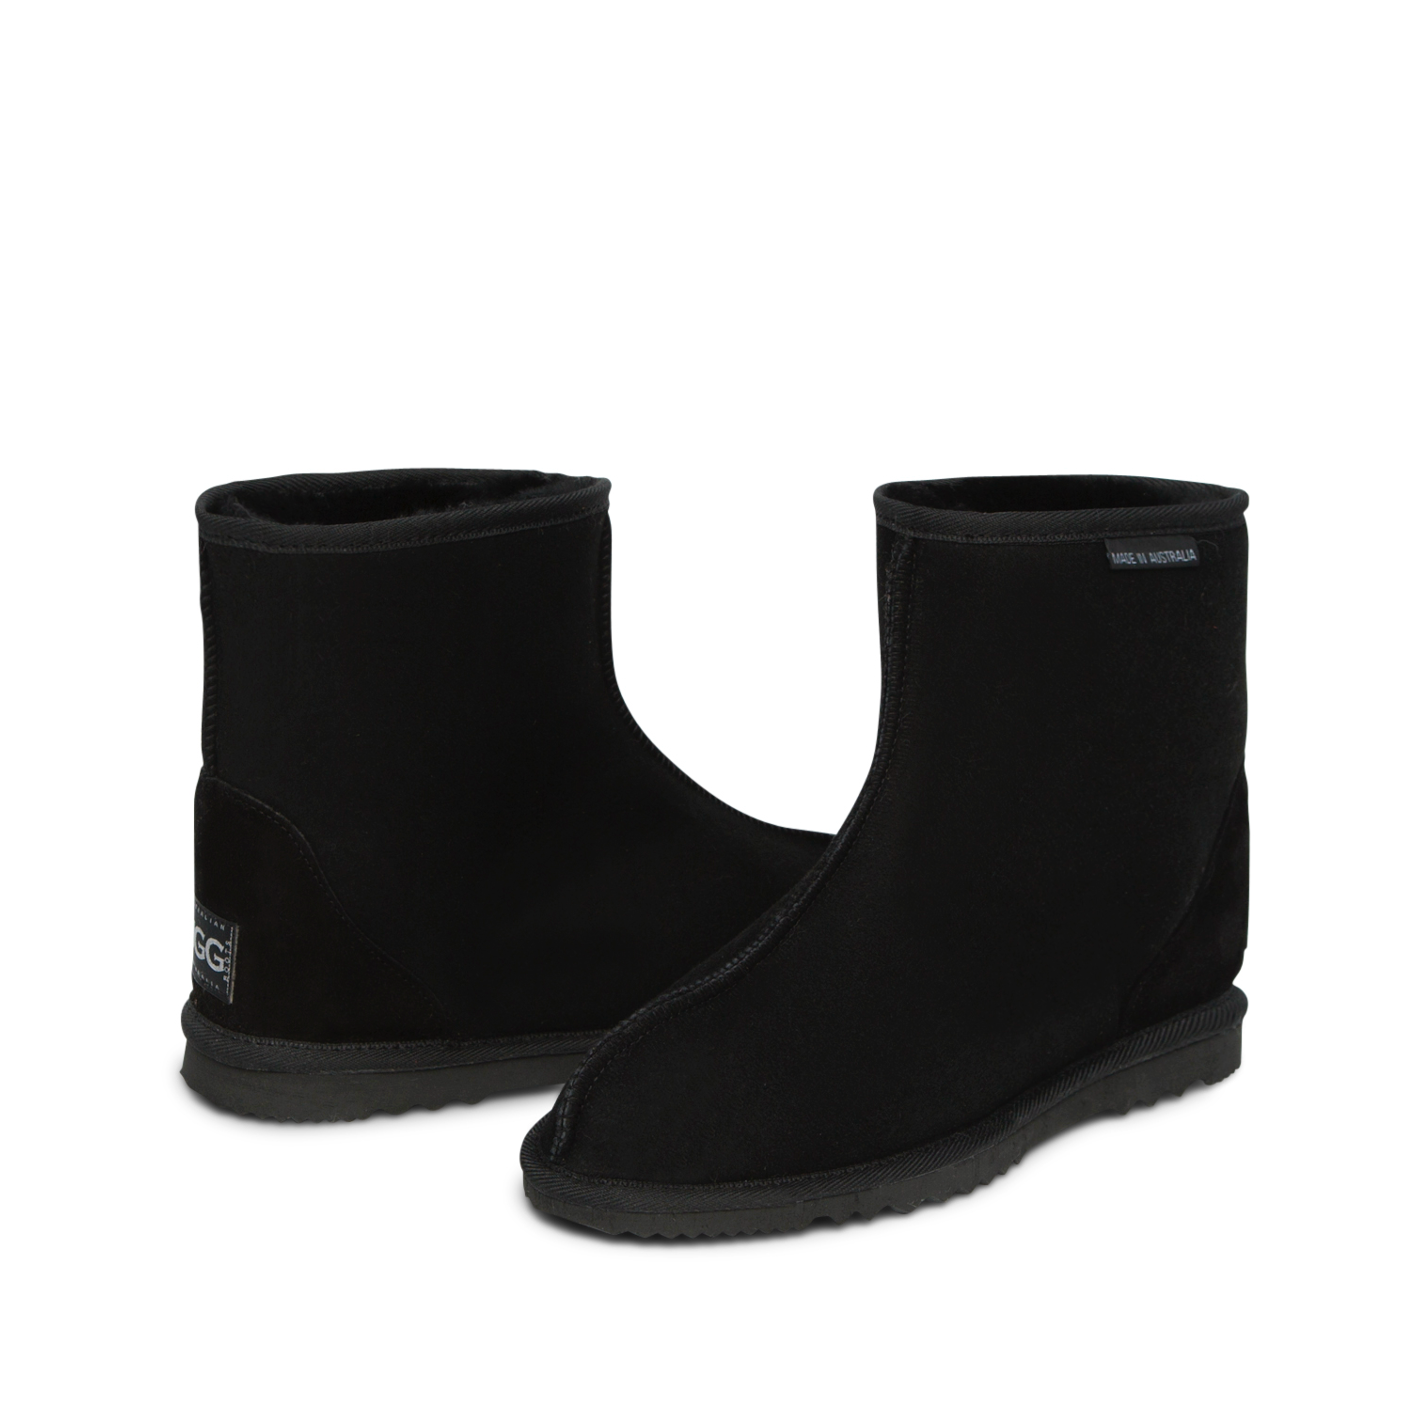 Men's Ankle Boots, seam in middle of front in black